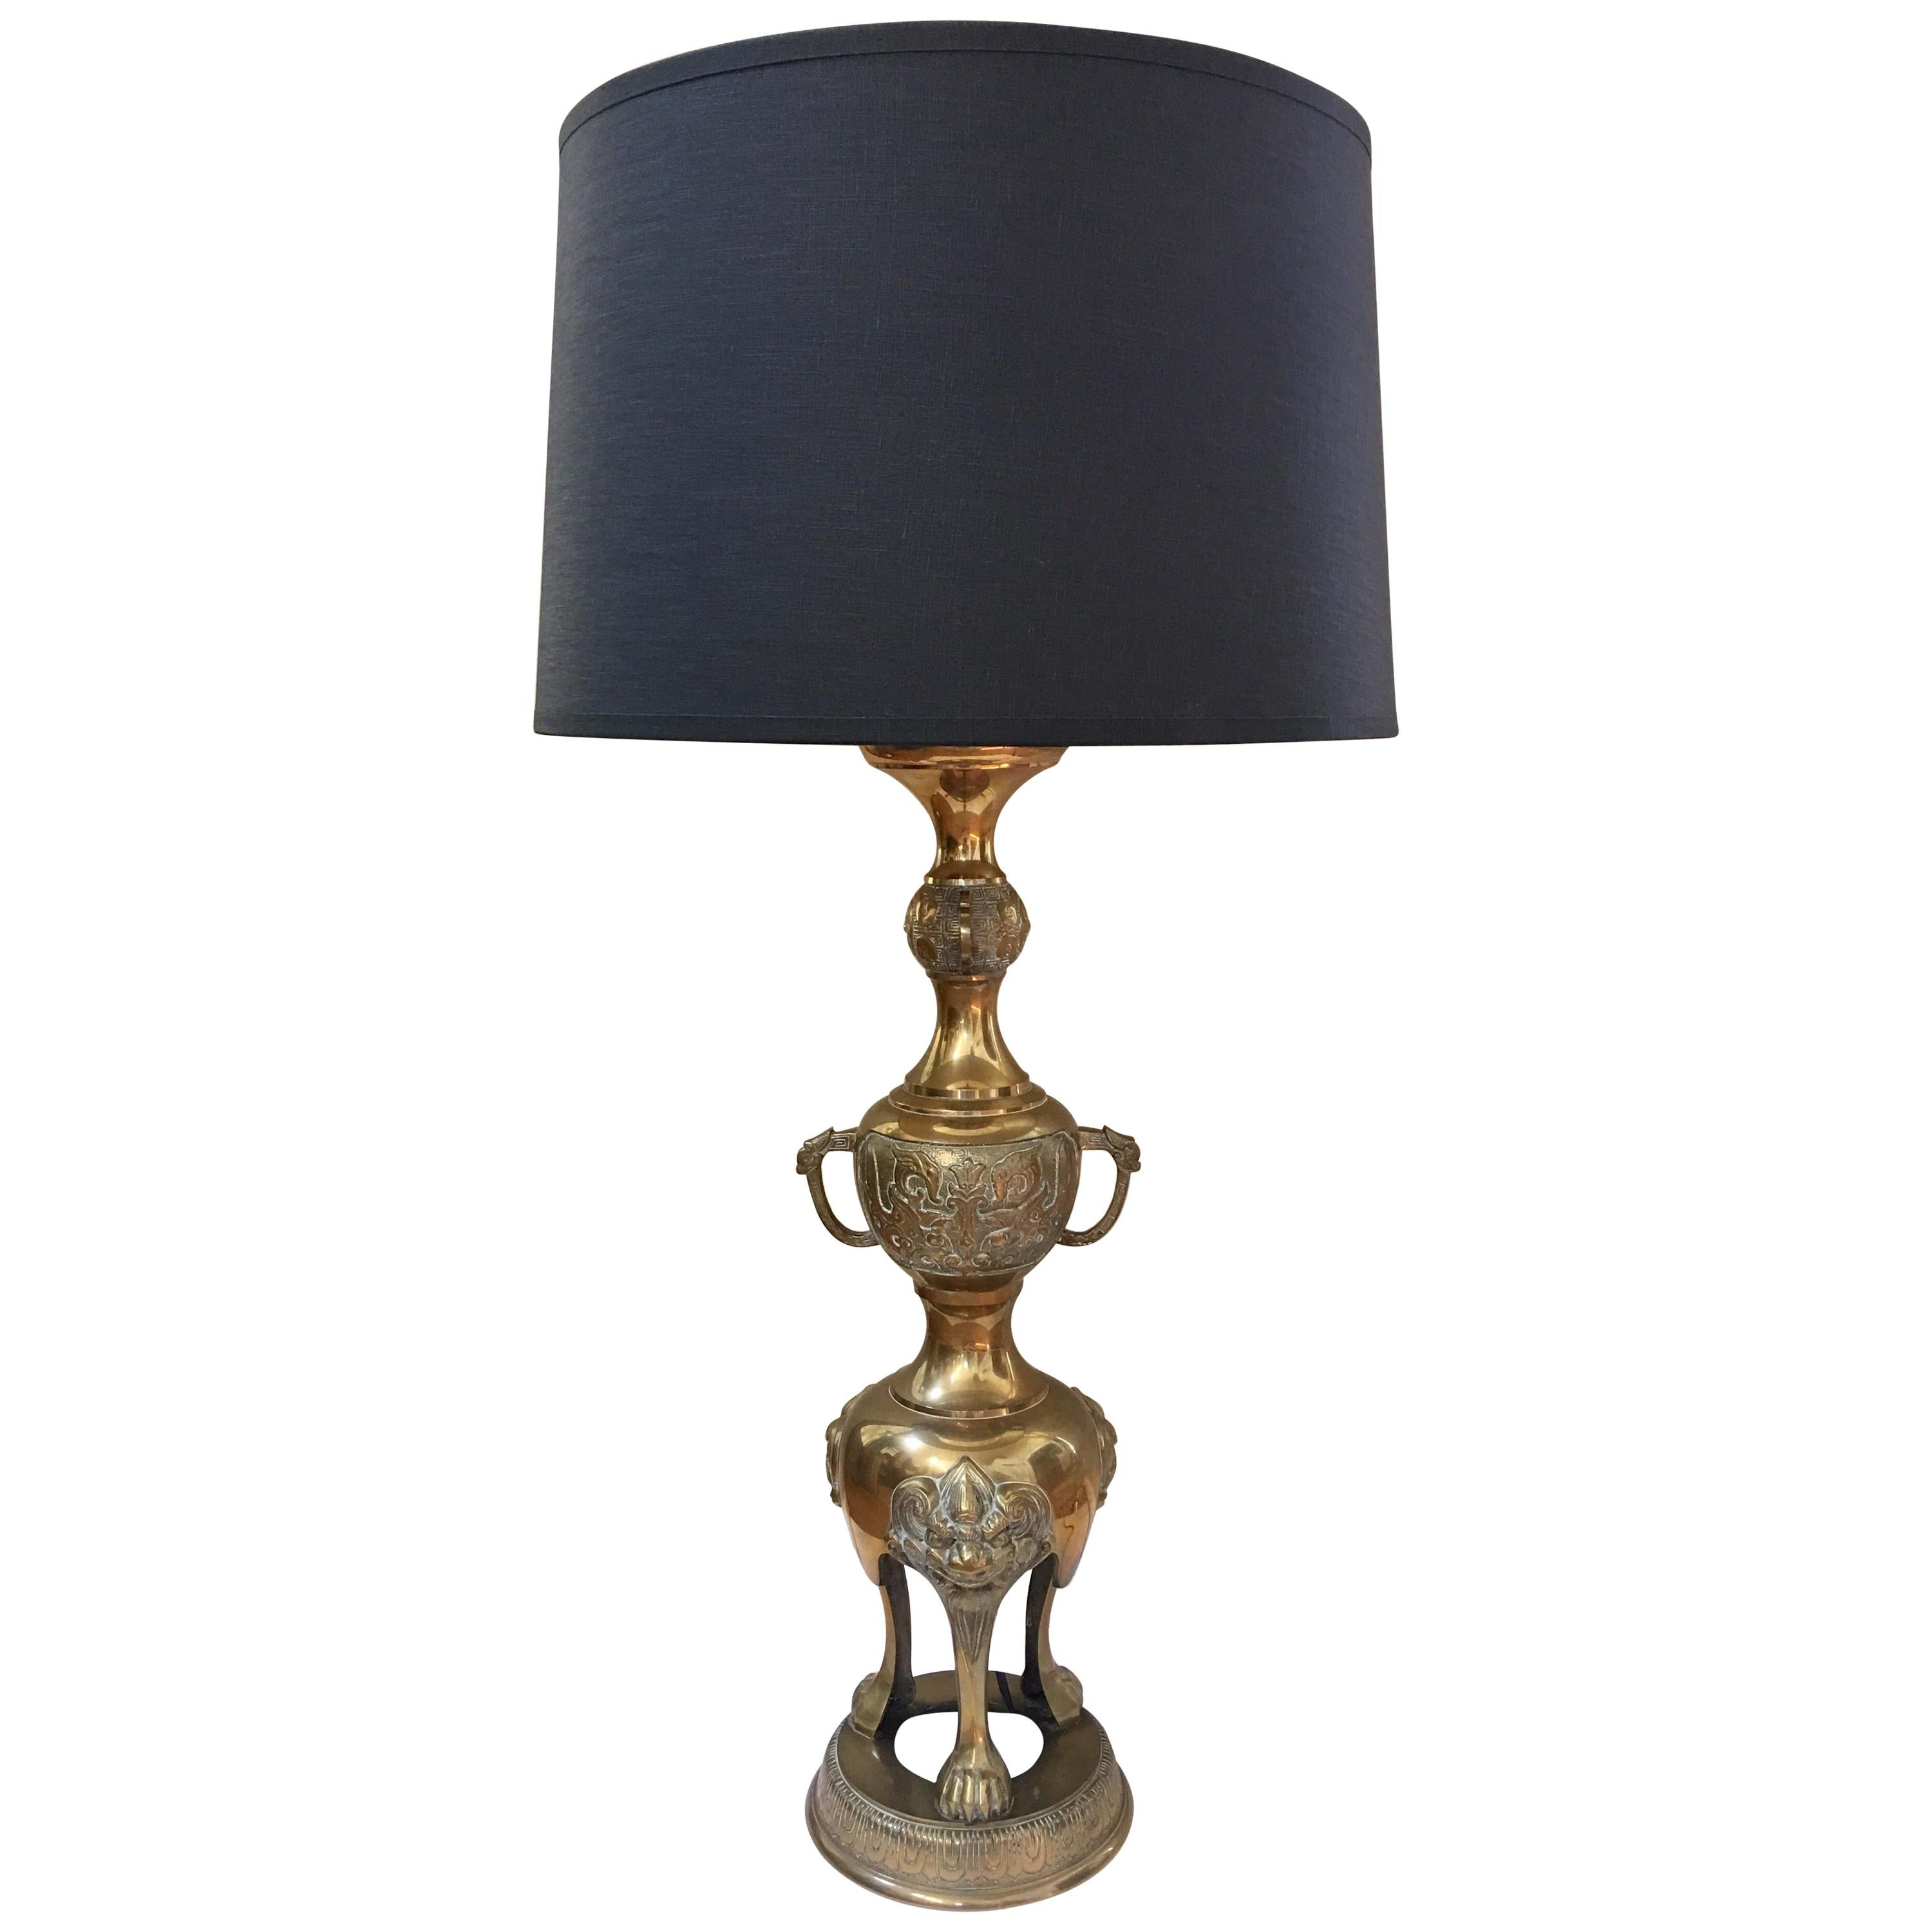 Pair of monumental and sculptural oriental style tall table lamps from the Hollywood Regency period featuring intricate carvings of the orient and foo dog heads and legs. Glamorous style of James Mont. These lighting art pieces make a great